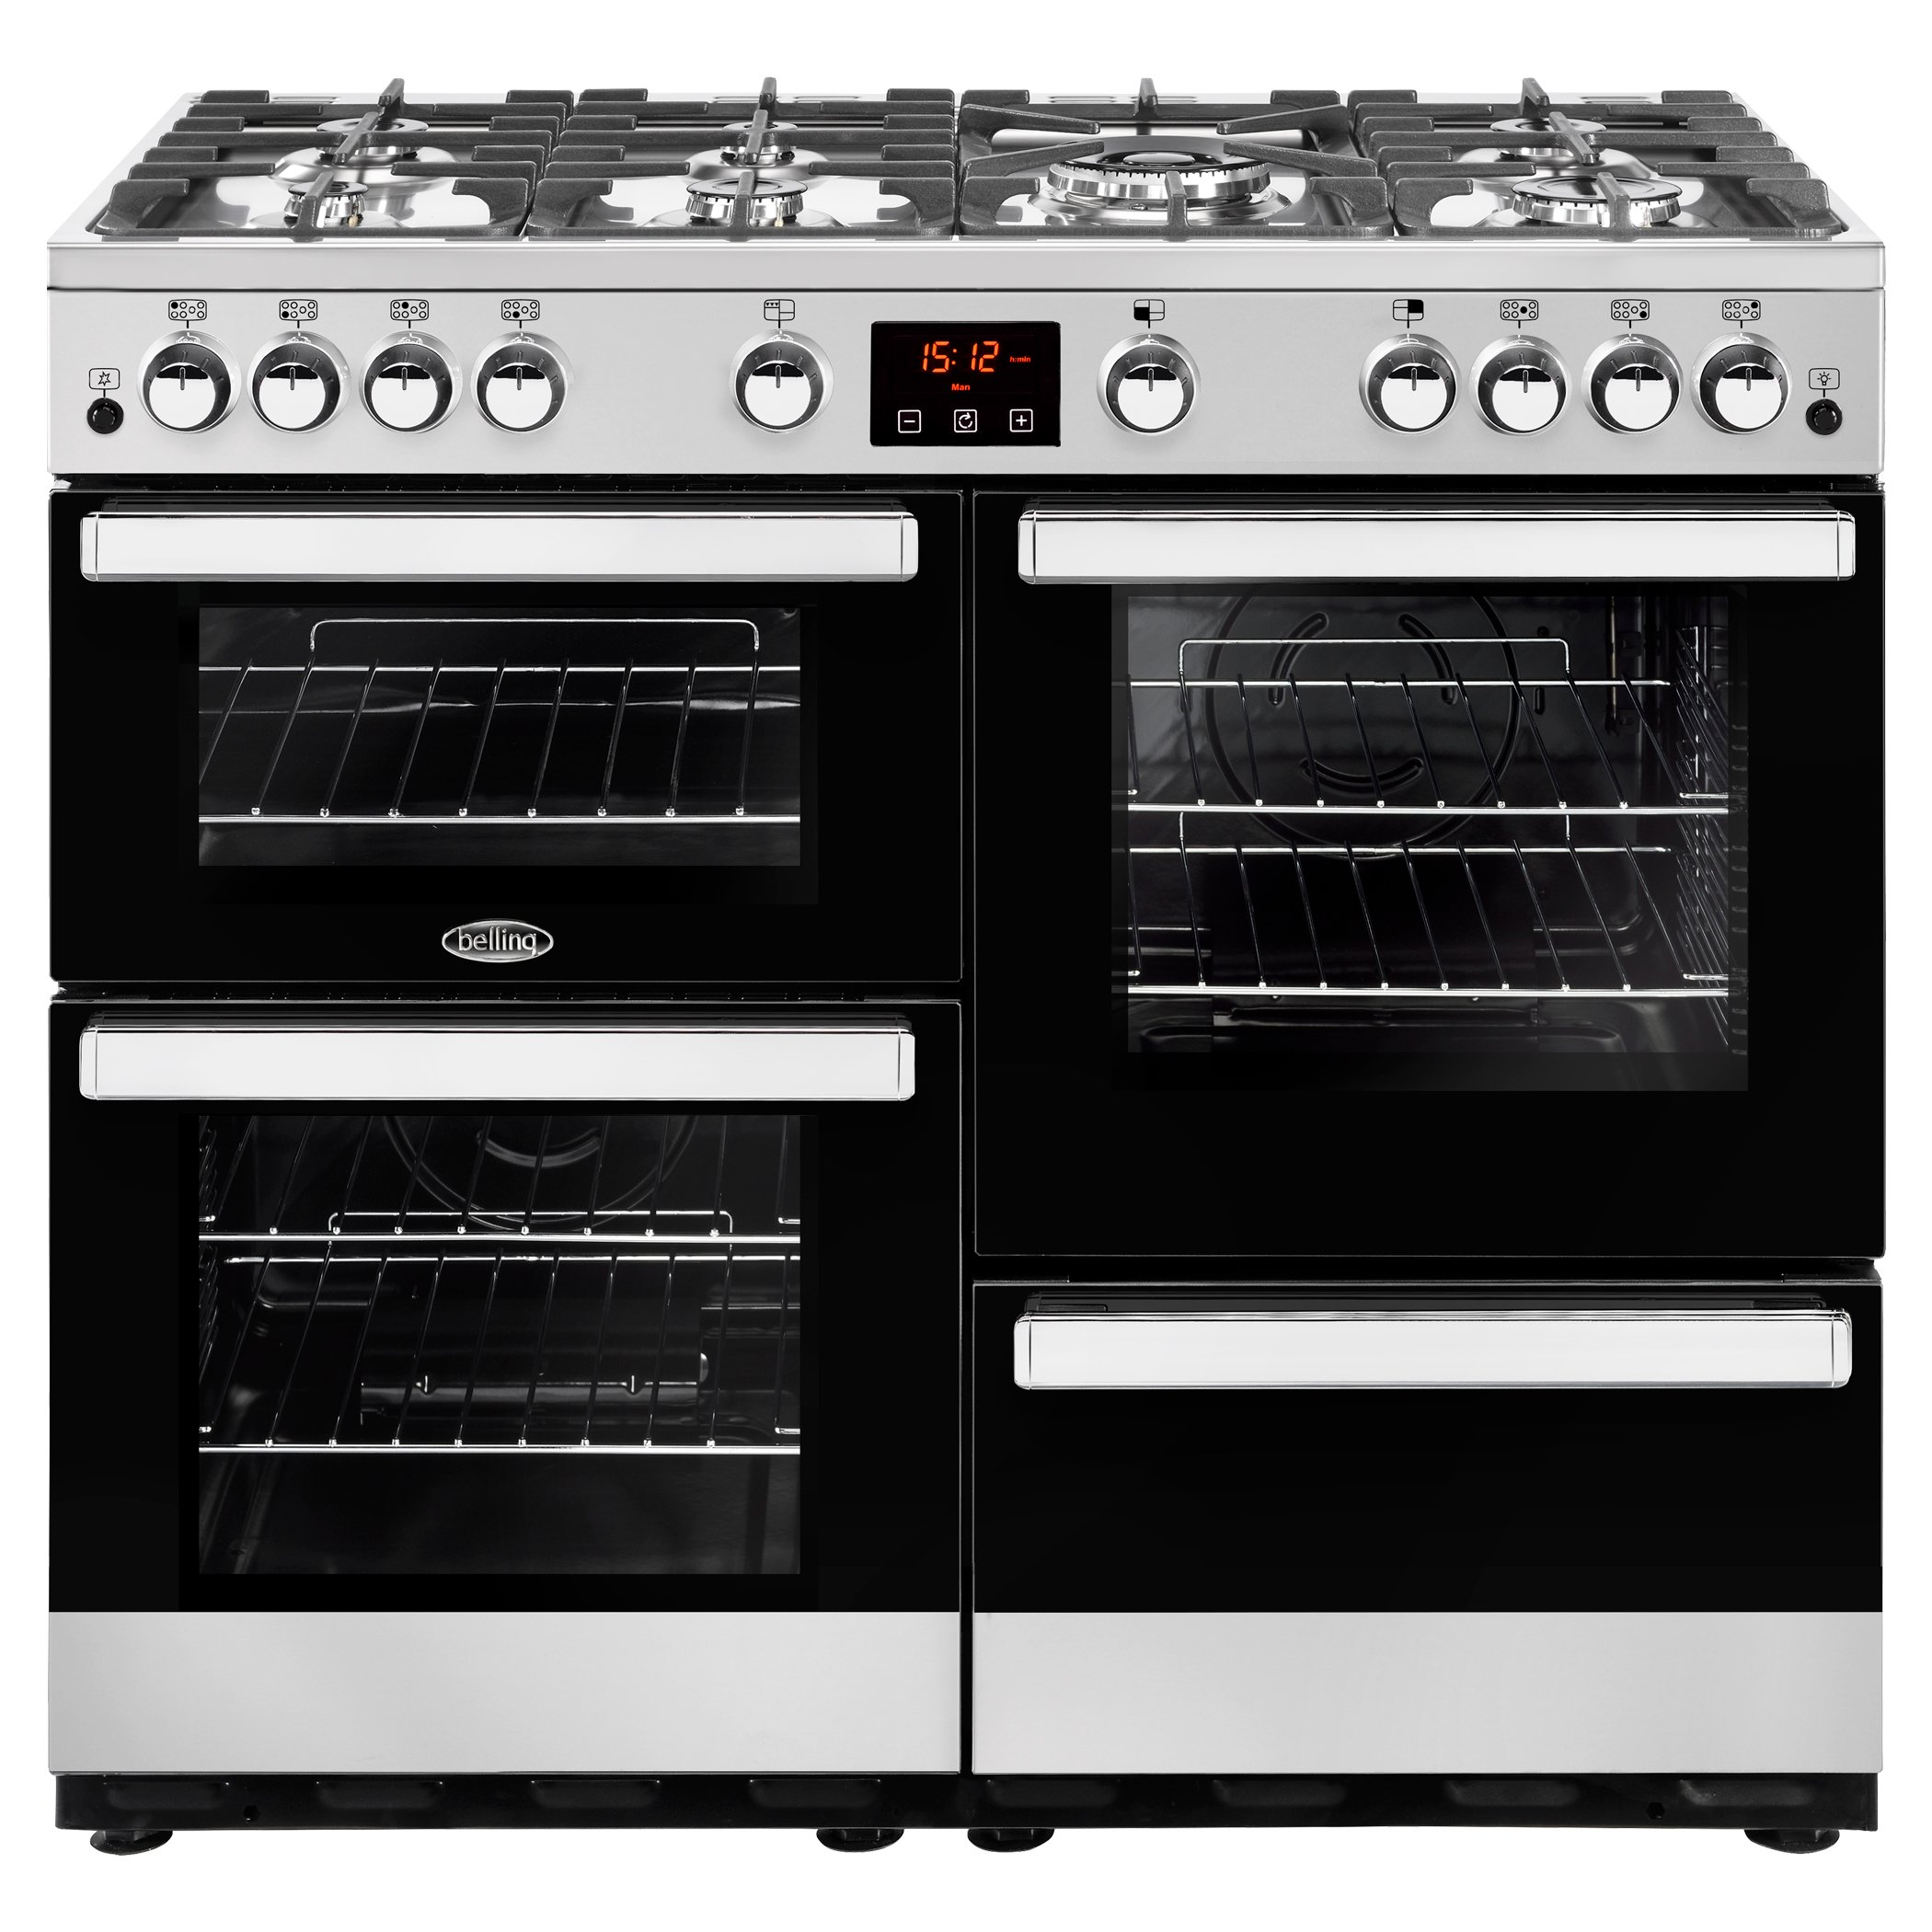 100cm gas range cooker with 7 burner gas hob with 4kW PowerWok burner, Maxi-Clock and easy clean enamel.